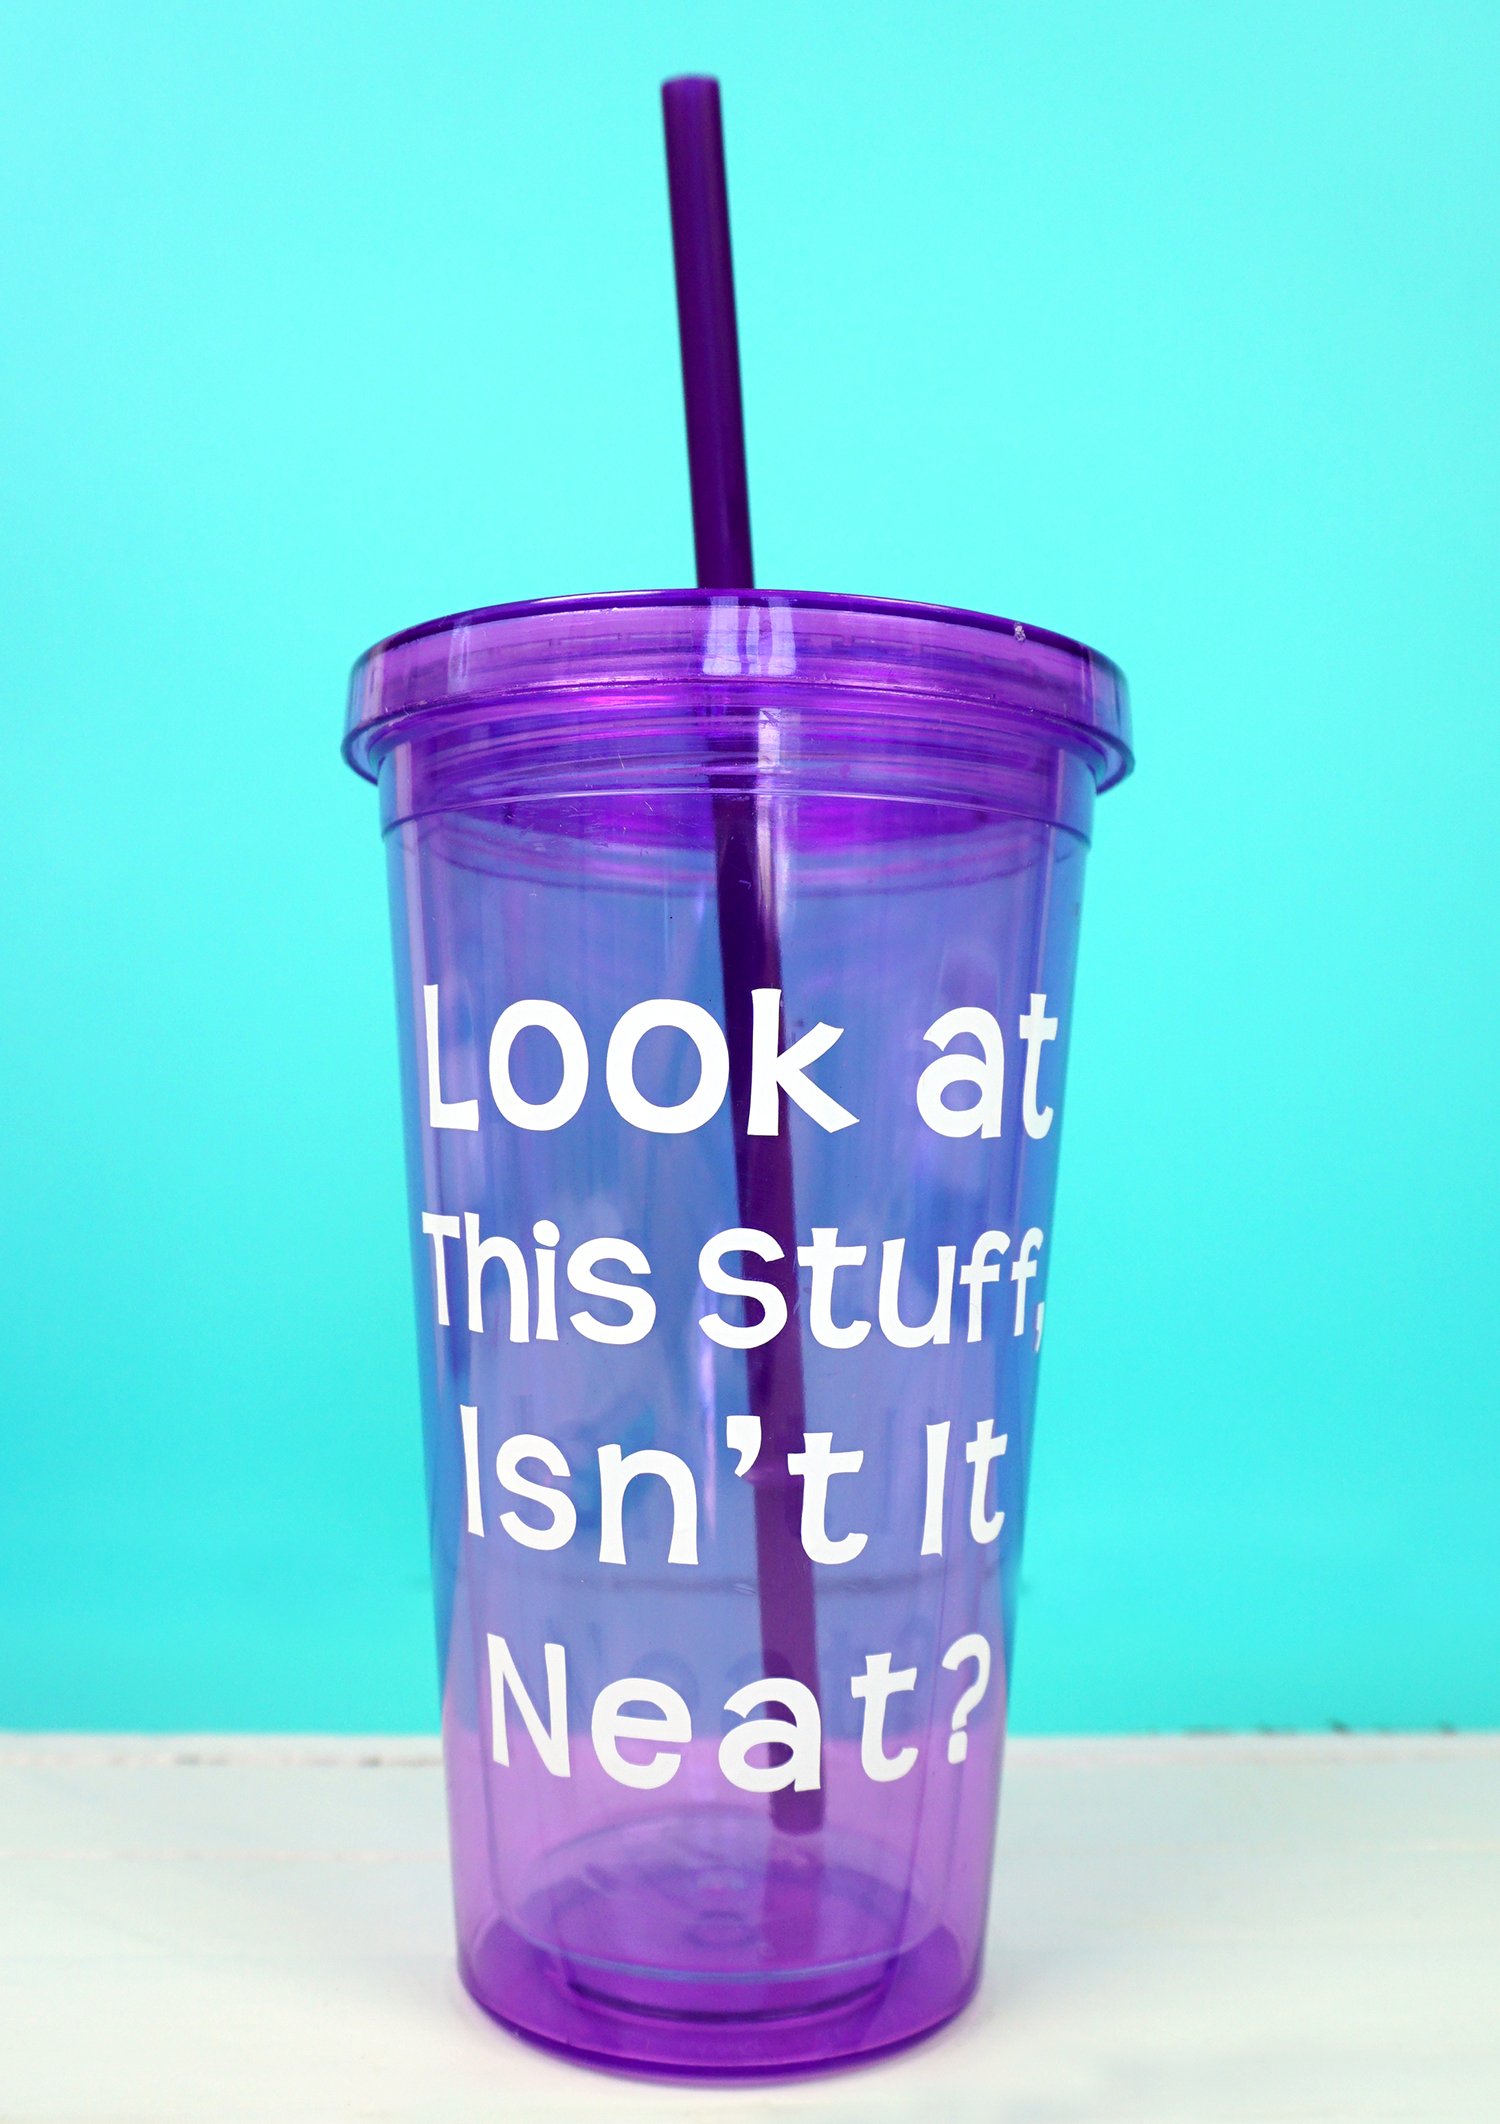 24oz Color-Changing Axel Tumbler Purple (pack of 4)